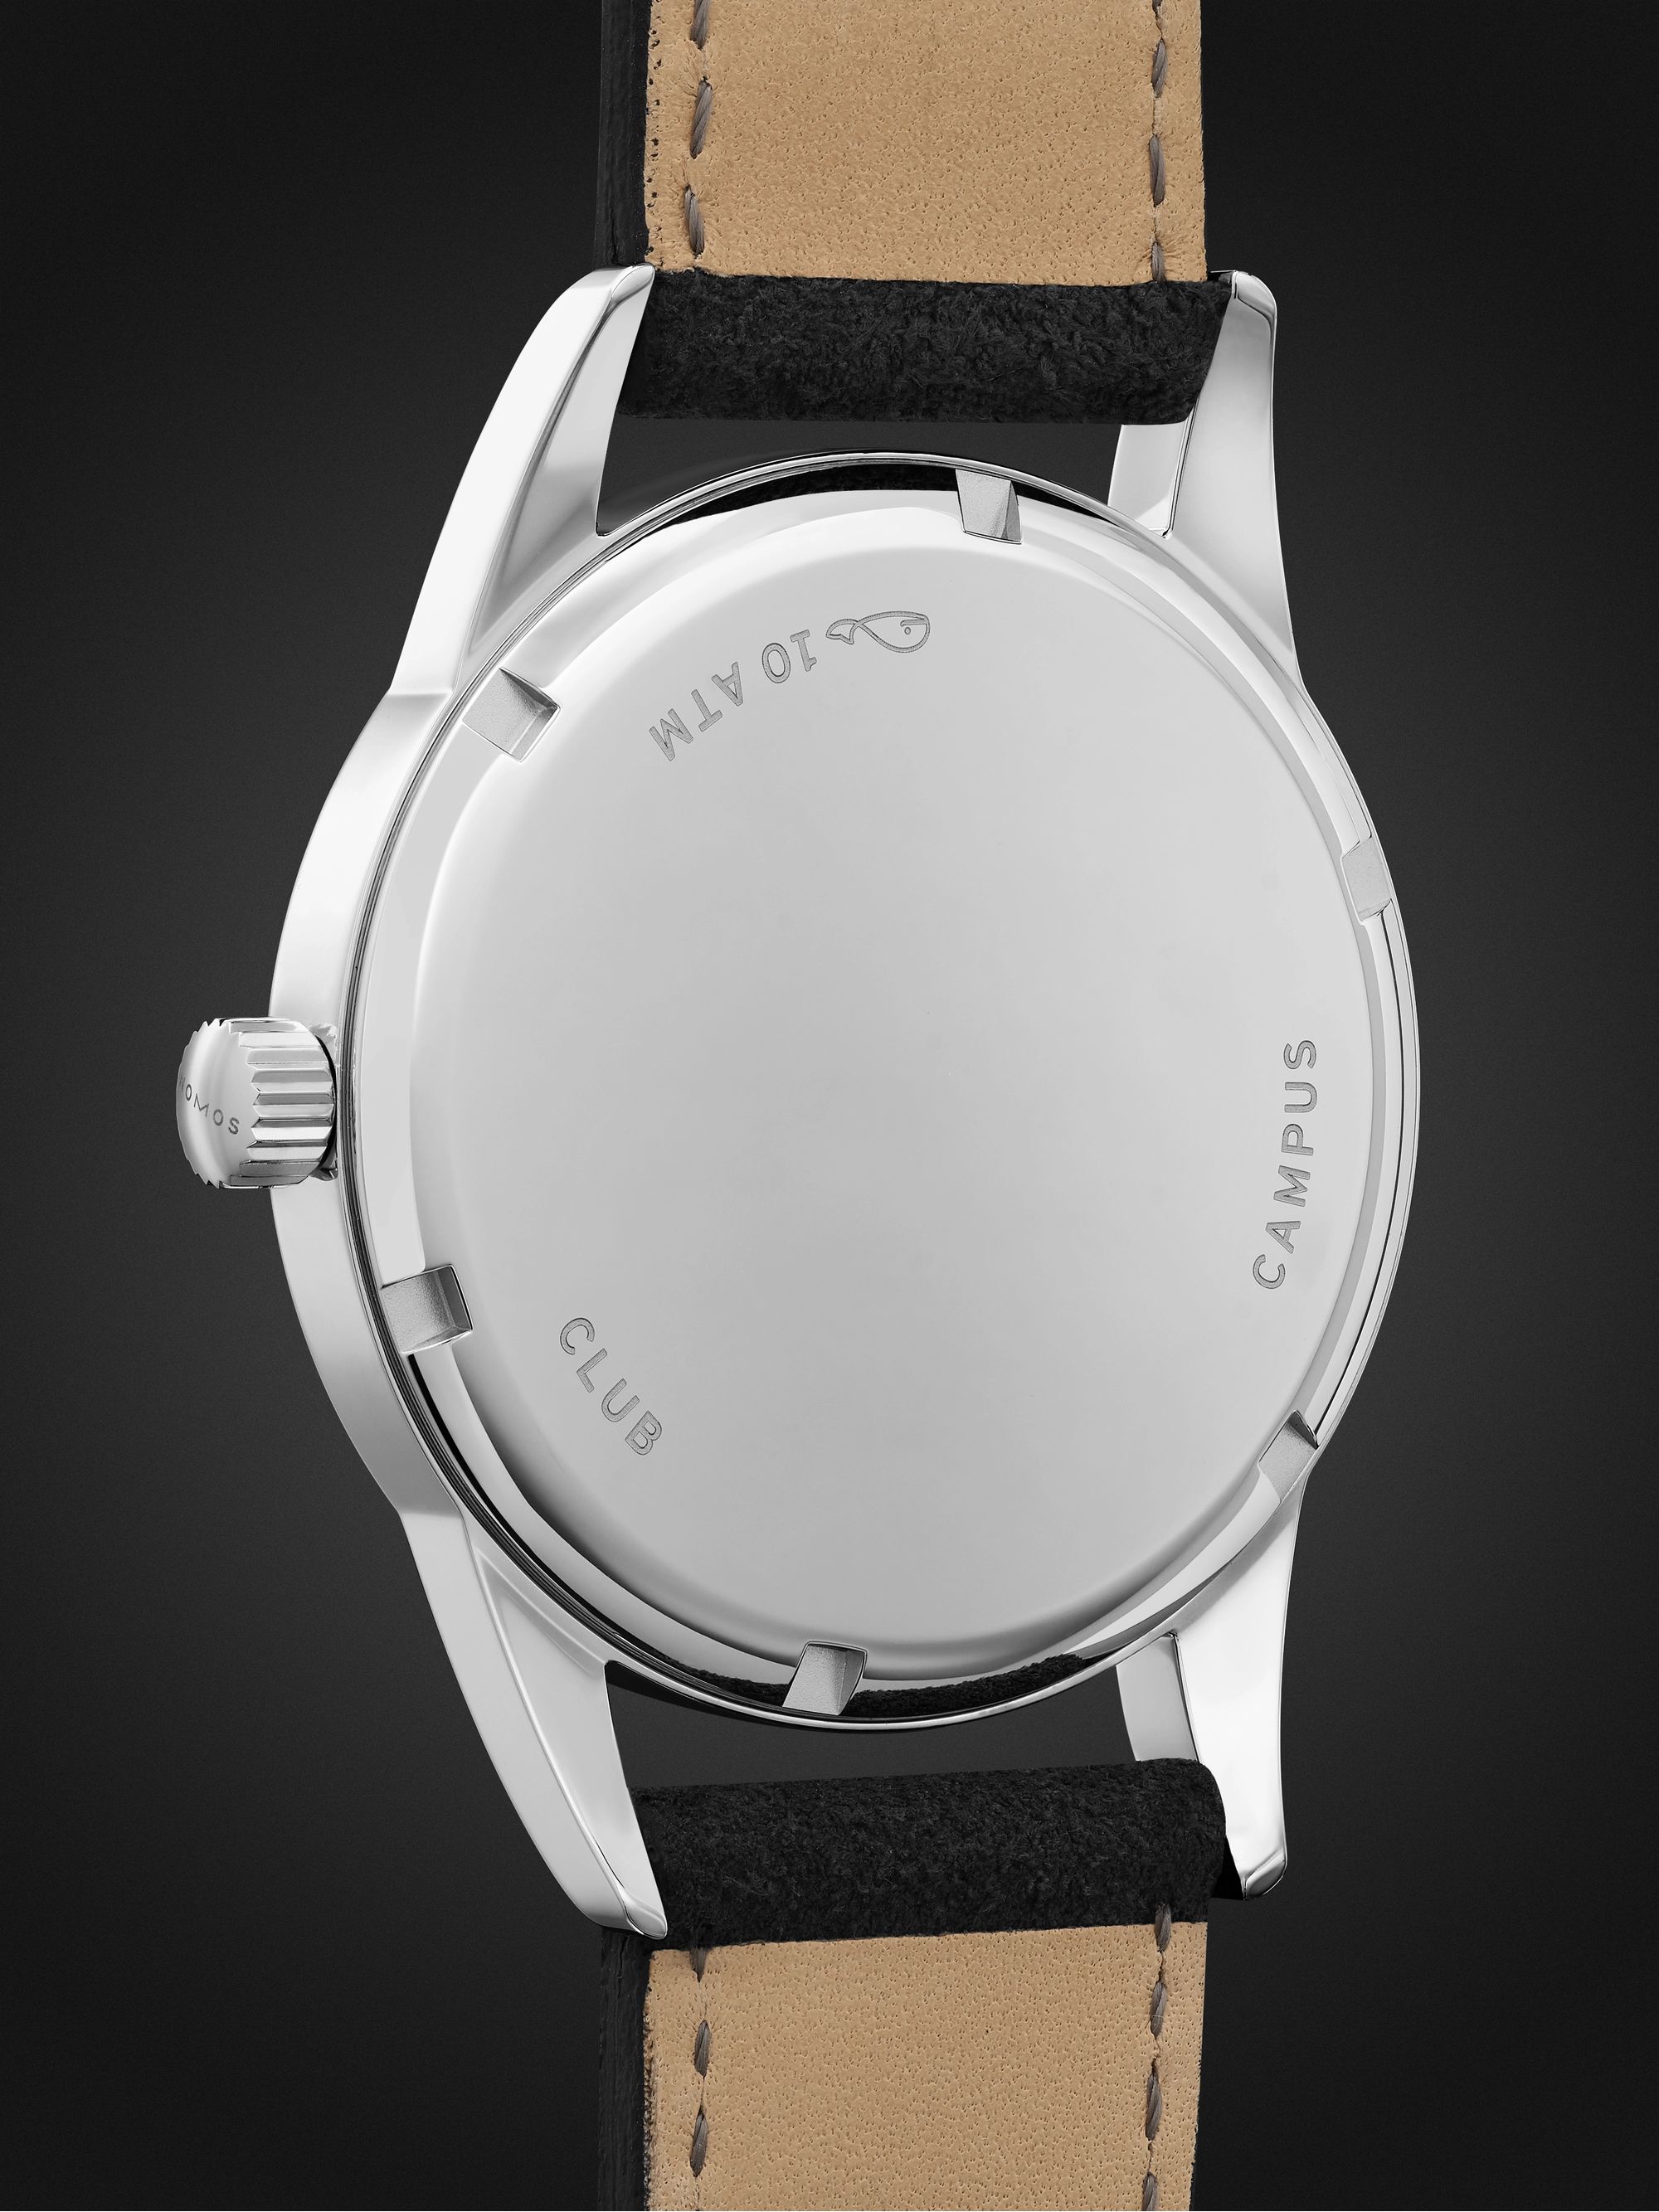 NOMOS GLASHÜTTE Club Campus Hand-Wound 38mm Stainless Steel and Leather Watch, Ref. No. 730